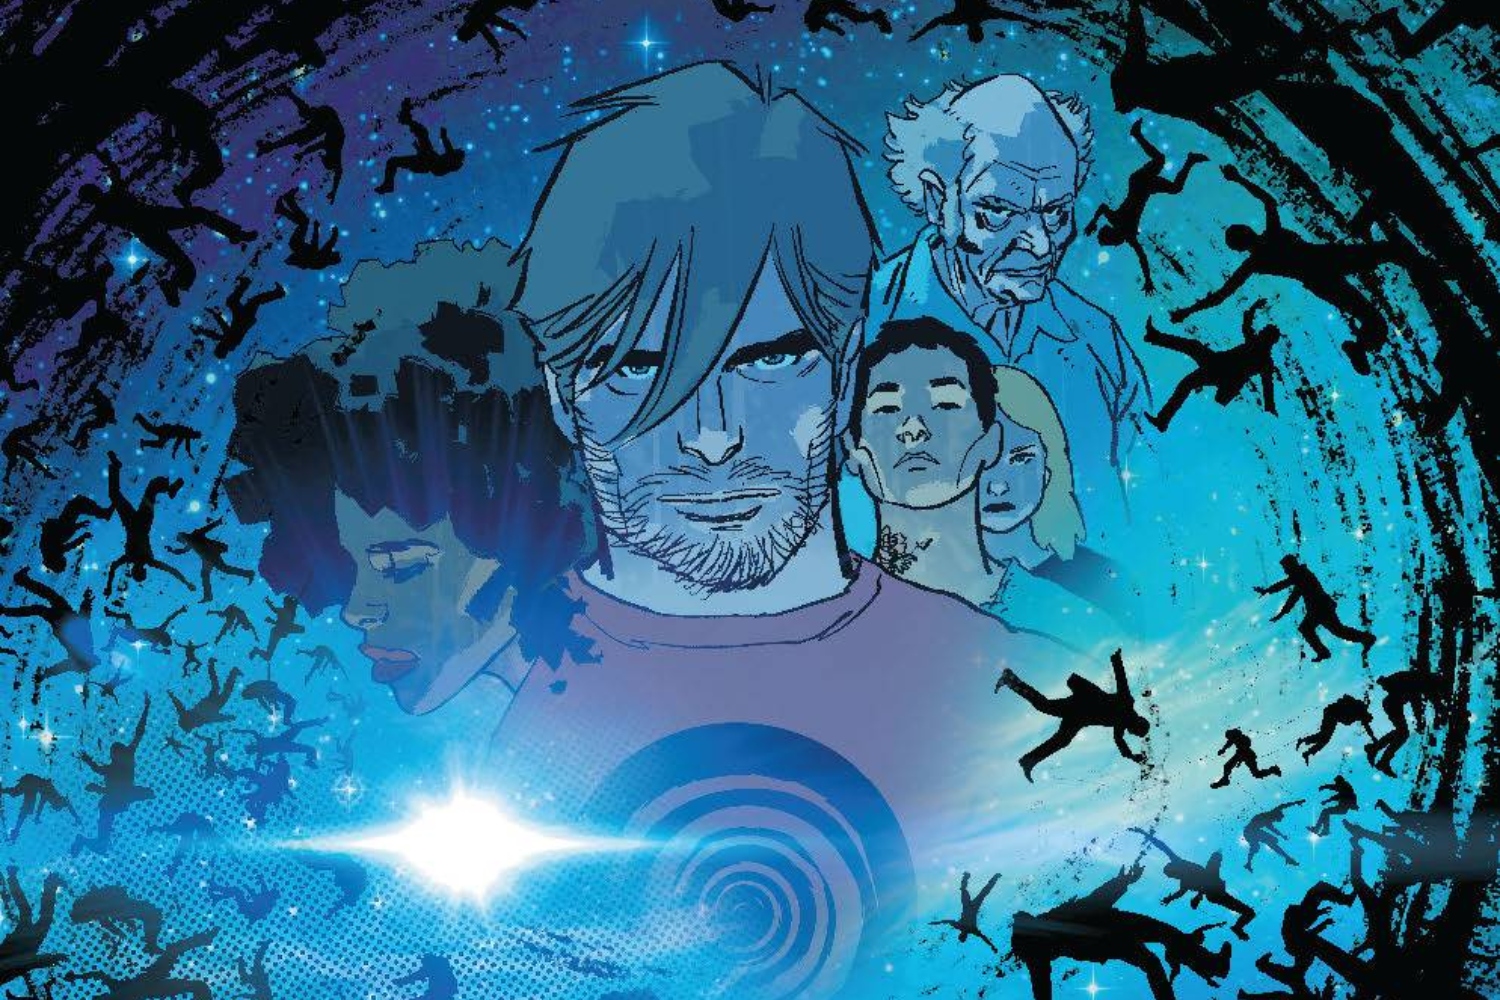 'The Displaced' #1 proves that home is where the heart (and horror) lies